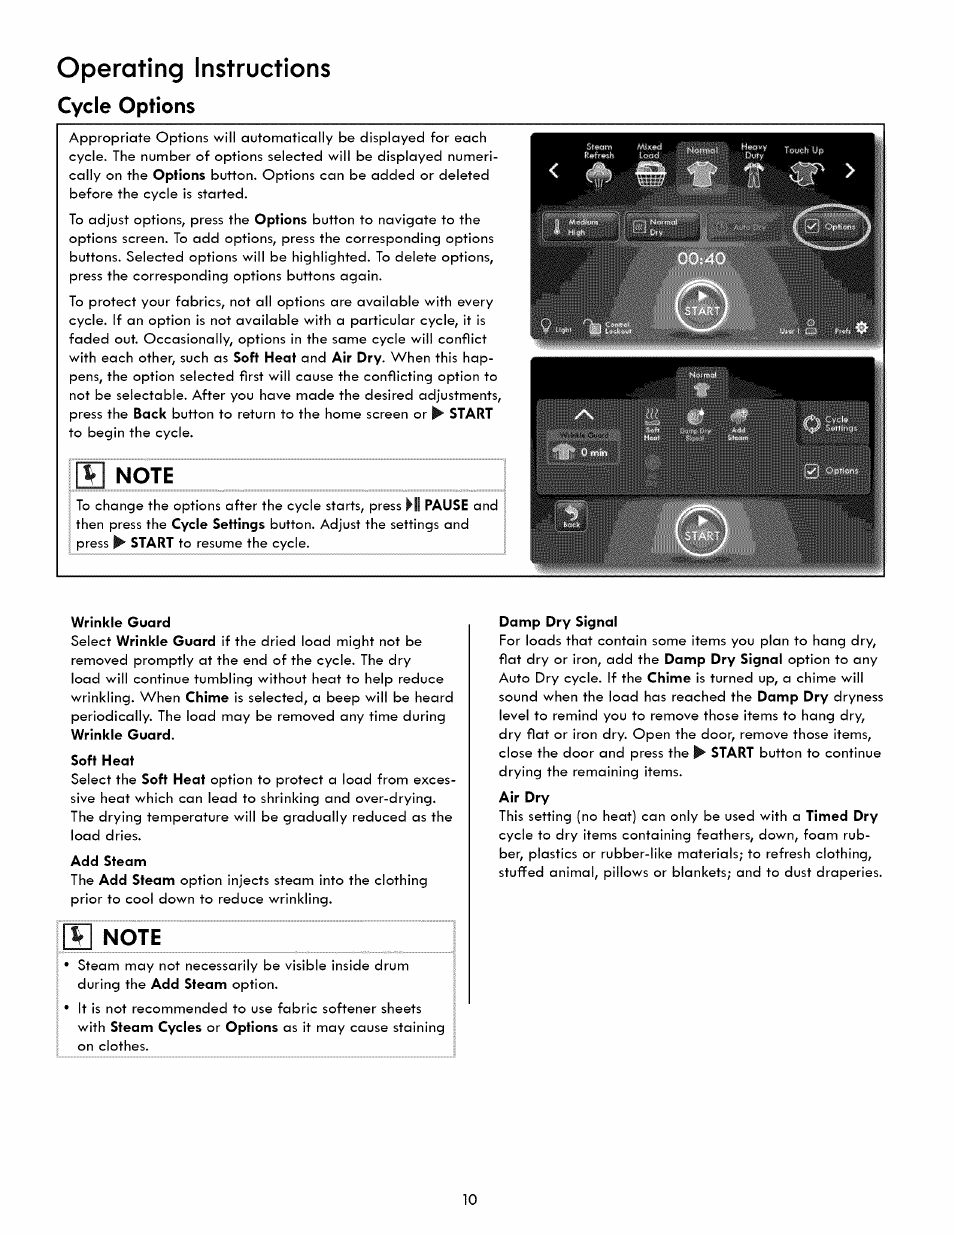 Cycle options, E note, V note | Operating instructions | Kenmore 417.8413 User Manual | Page 10 / 20